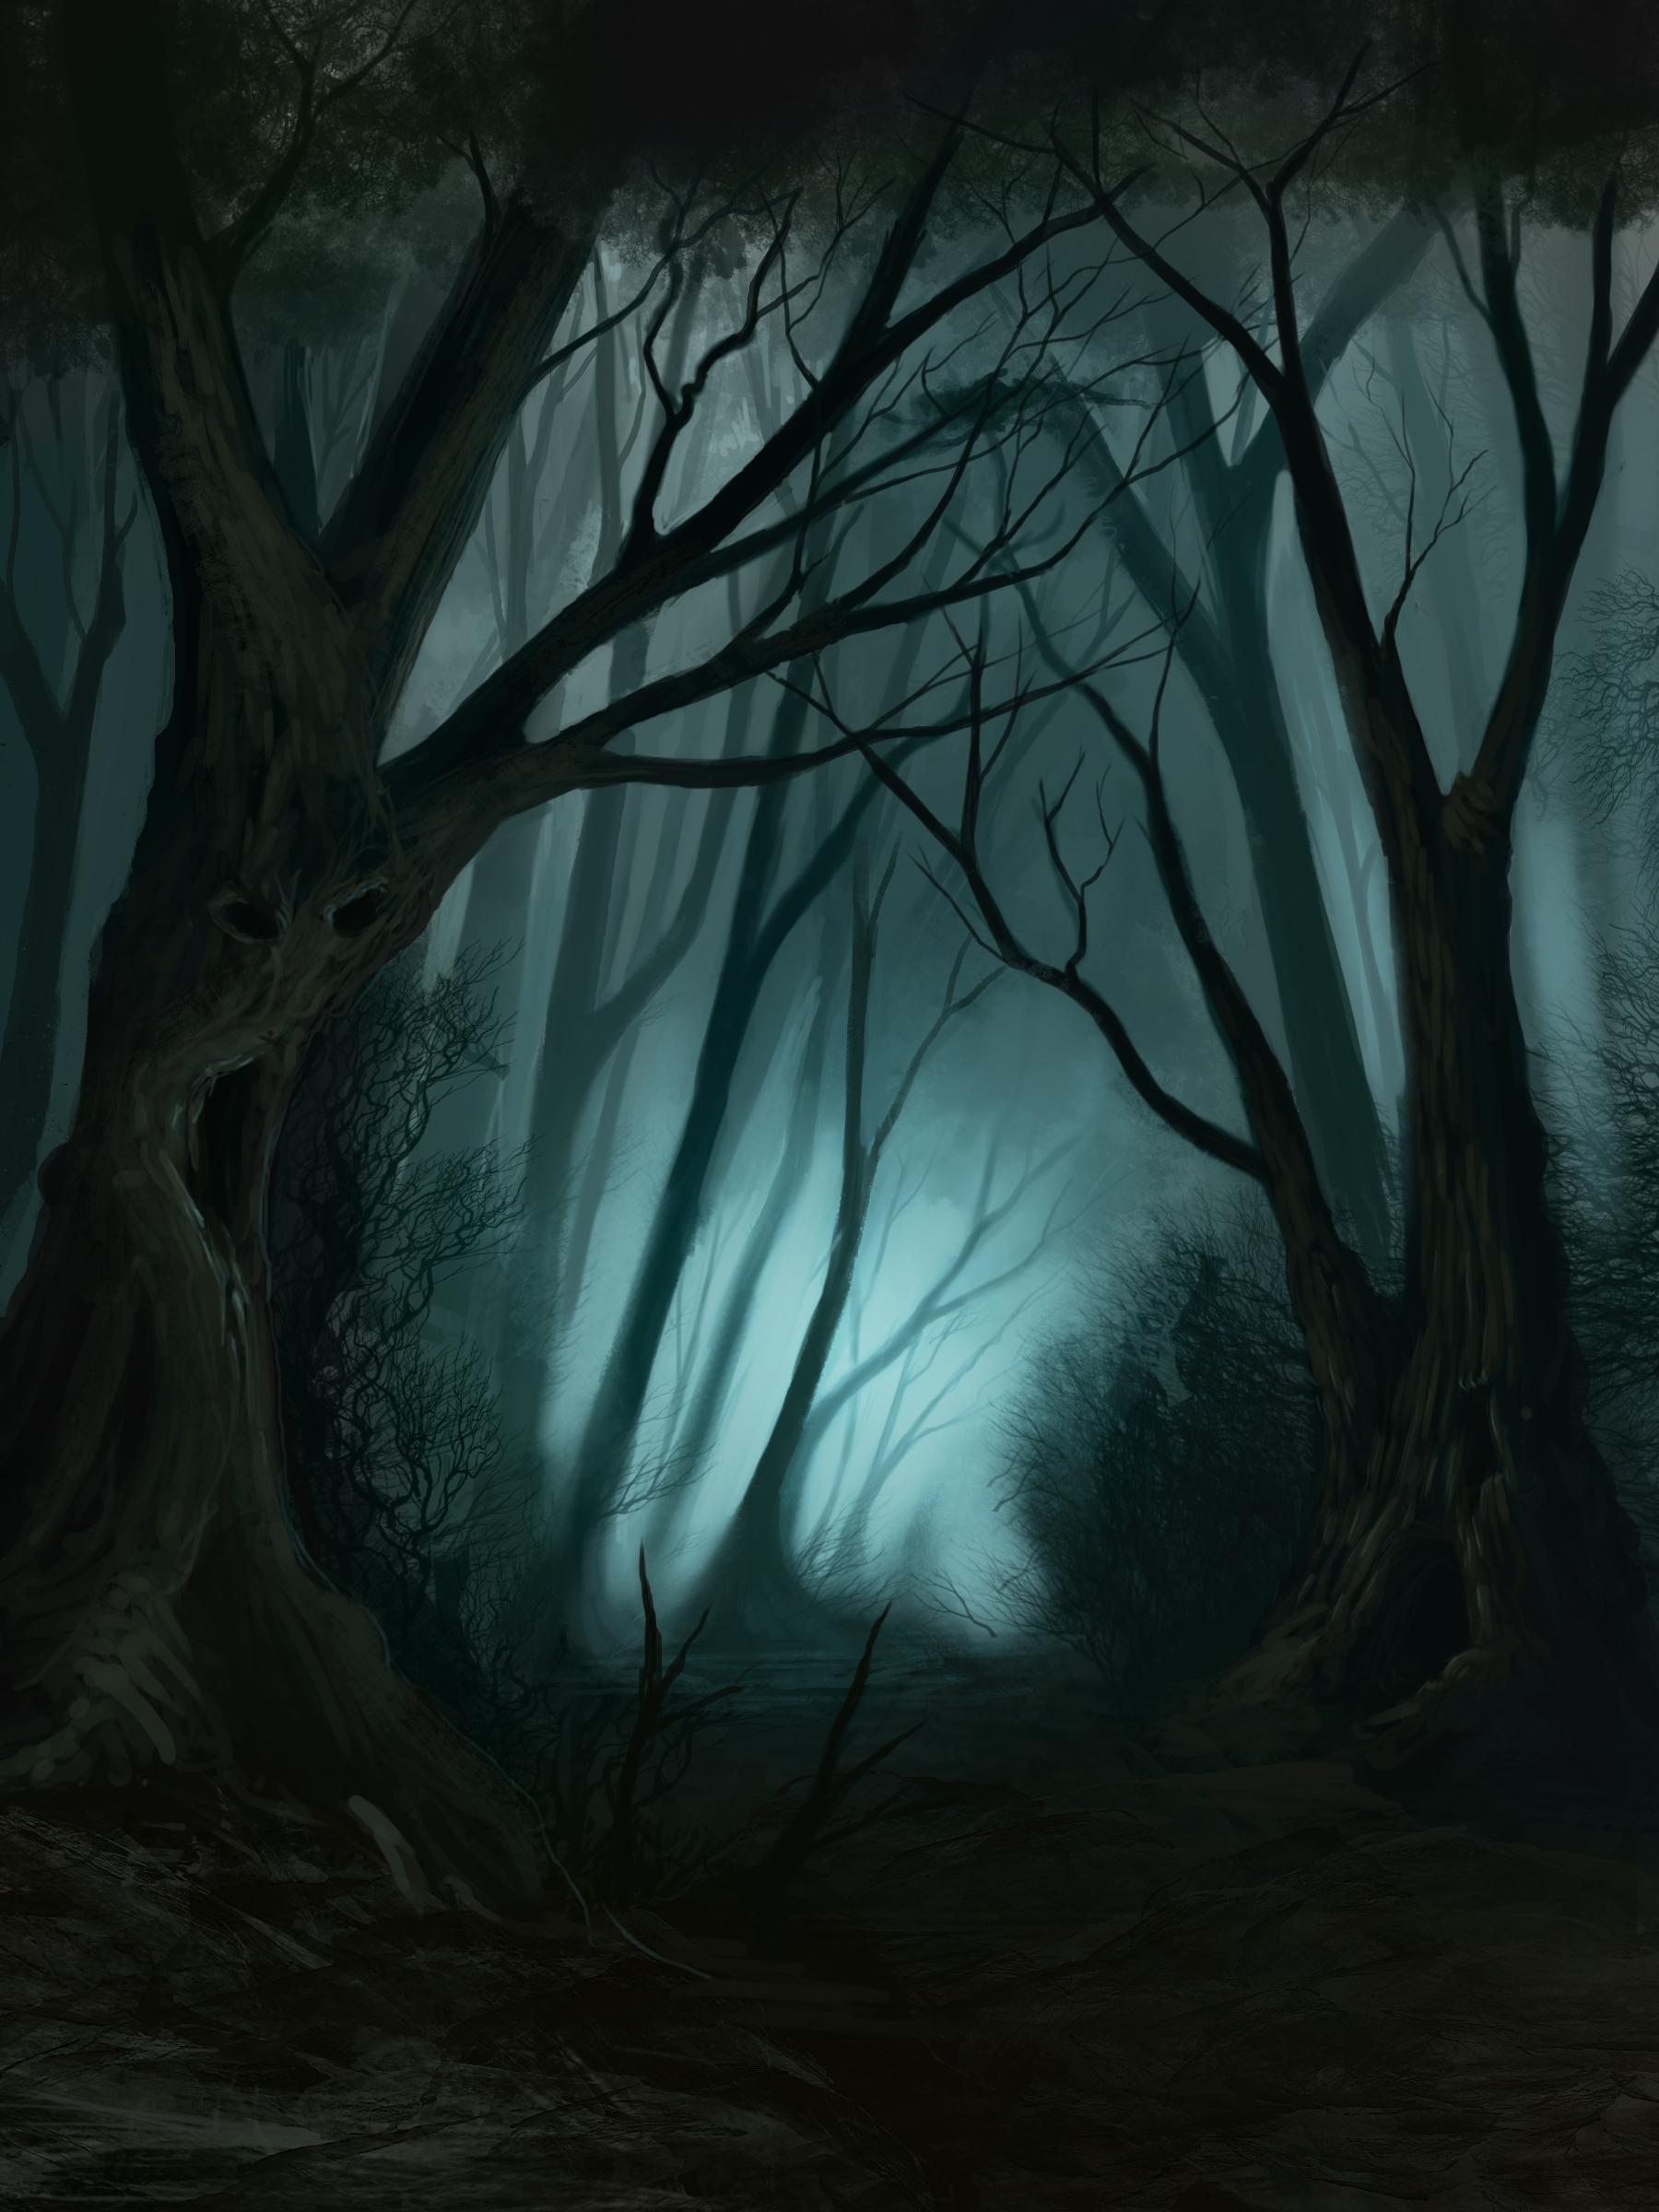 Creepy Forest on Pinterest Dark Forest, Forests and Haunted Forest